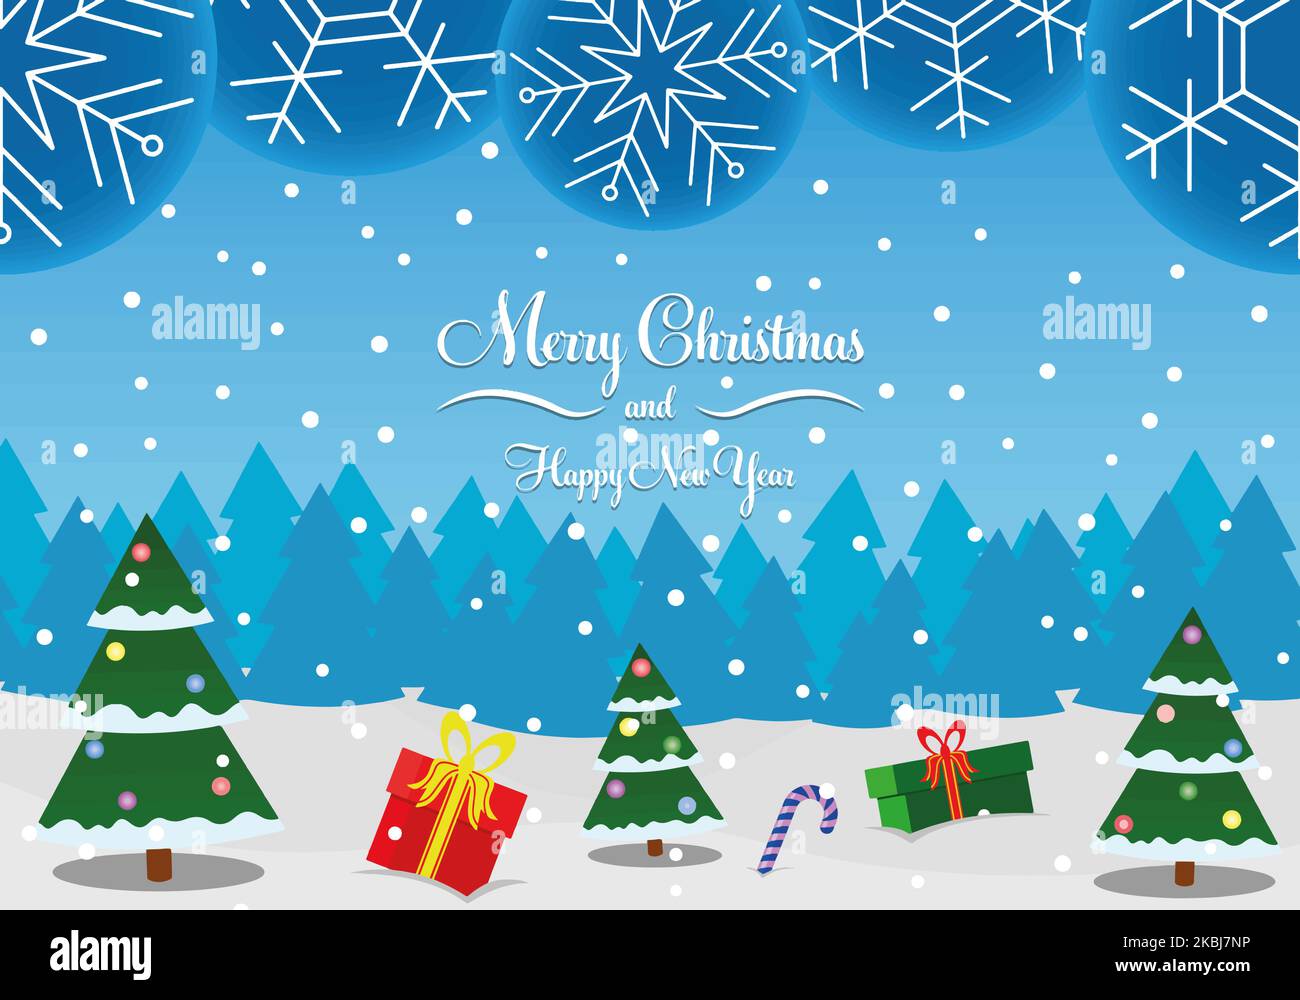 merry christmas banner with christmas trees, toys, gifts, wood Stock Vector